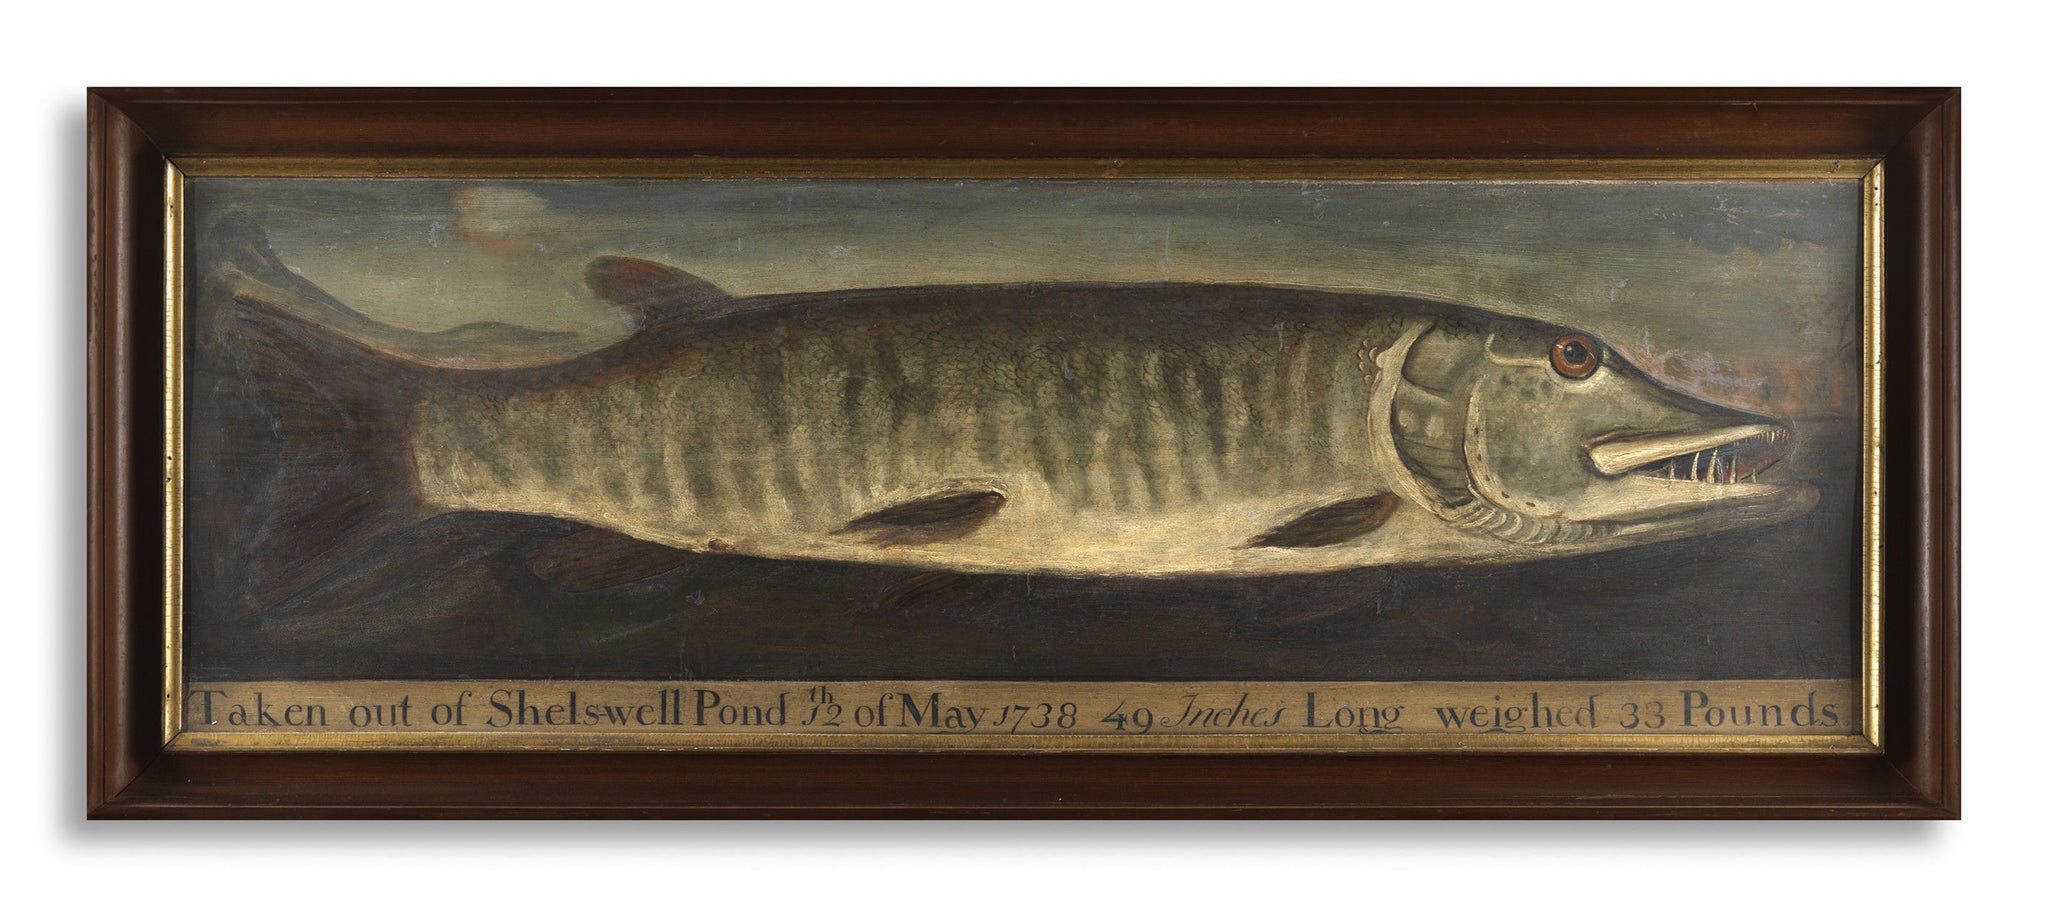 Exceptional Naïve Painting of a Trophy Pike